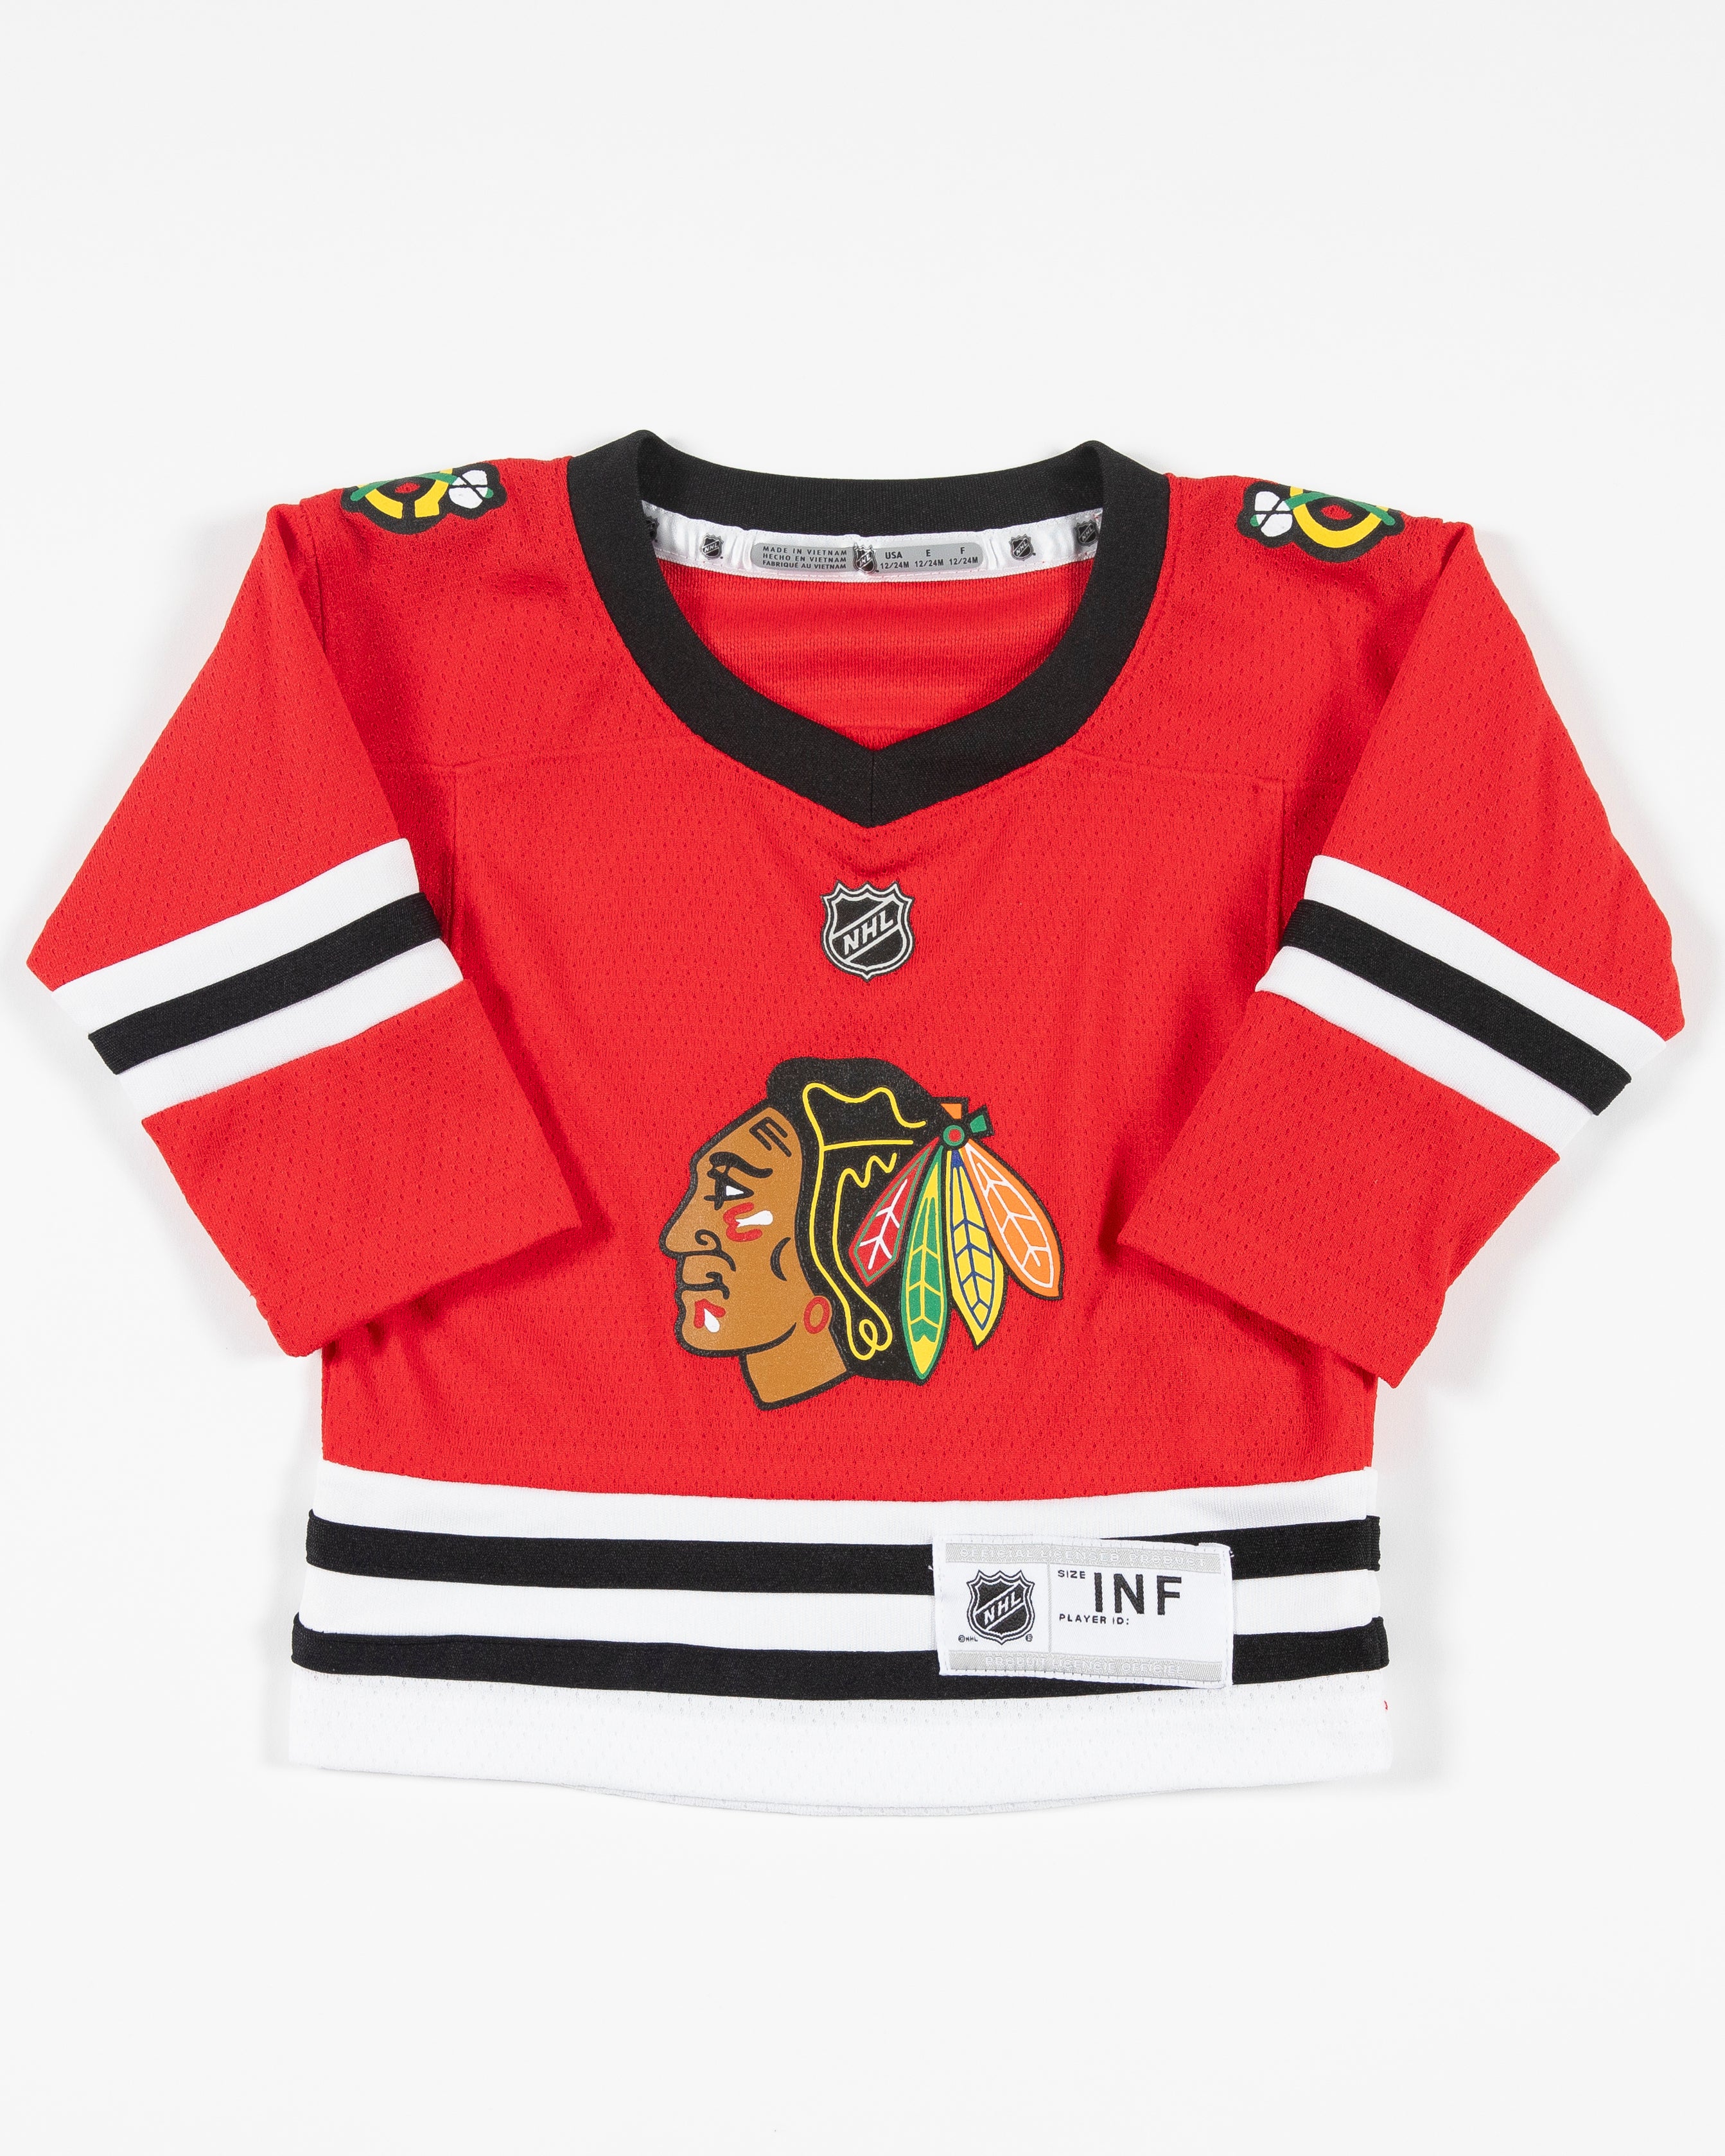 Chicago Blackhawks - ⚫️⚪️⚫️𝐒𝐮𝐫𝐩𝐫𝐢𝐬𝐞⚫️⚪️⚫️ Alternate jersey dates  coming at noon!